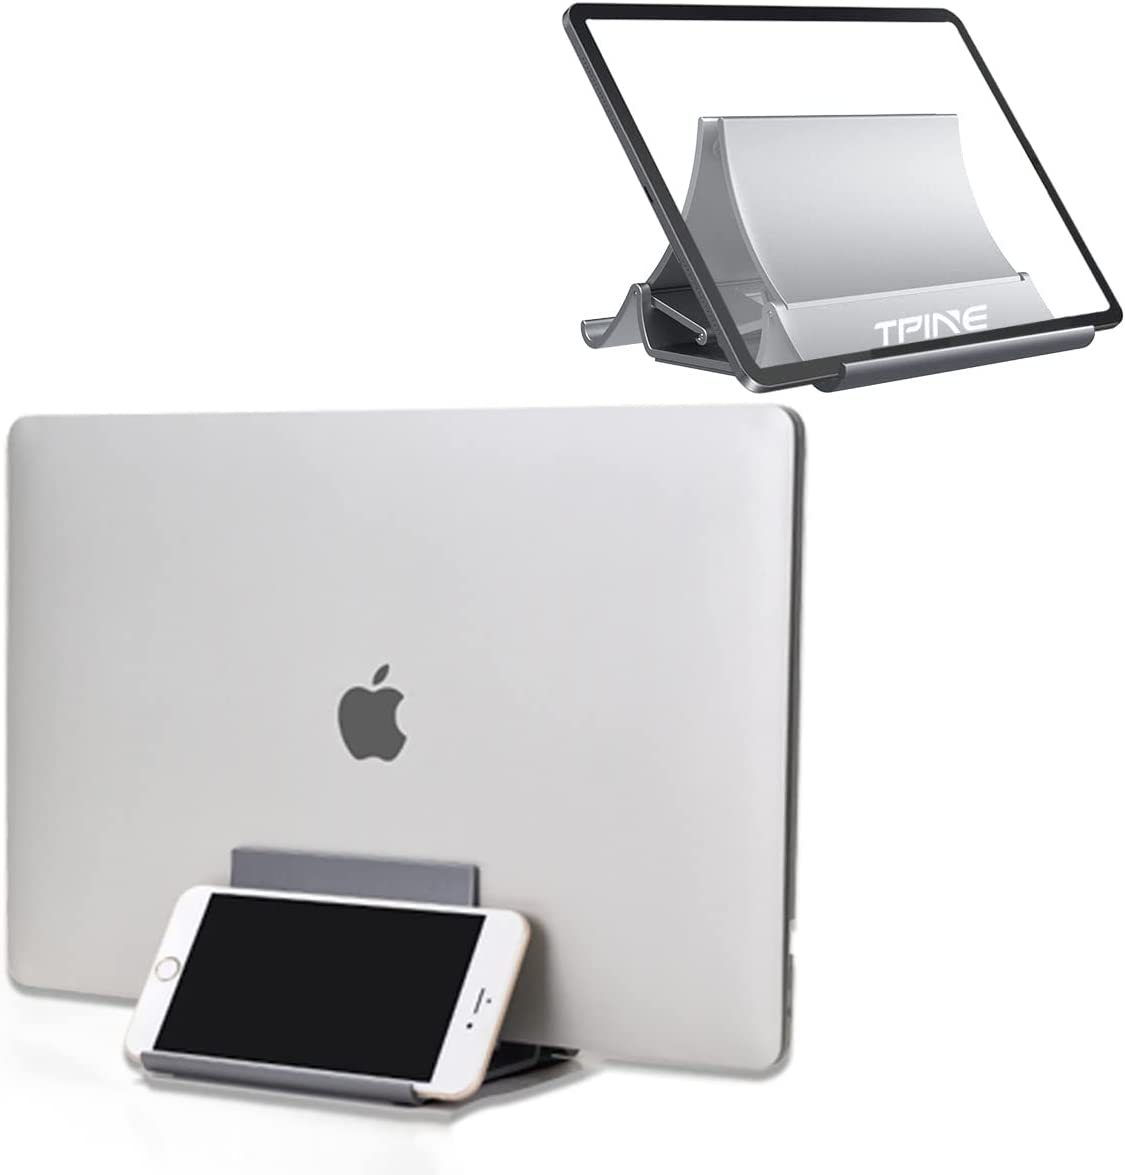 Vertical Laptop Stand - Laptop Holder with Laptop and Ipad Stand, Laptop Rack for Multiple Laptops( Space Gray)